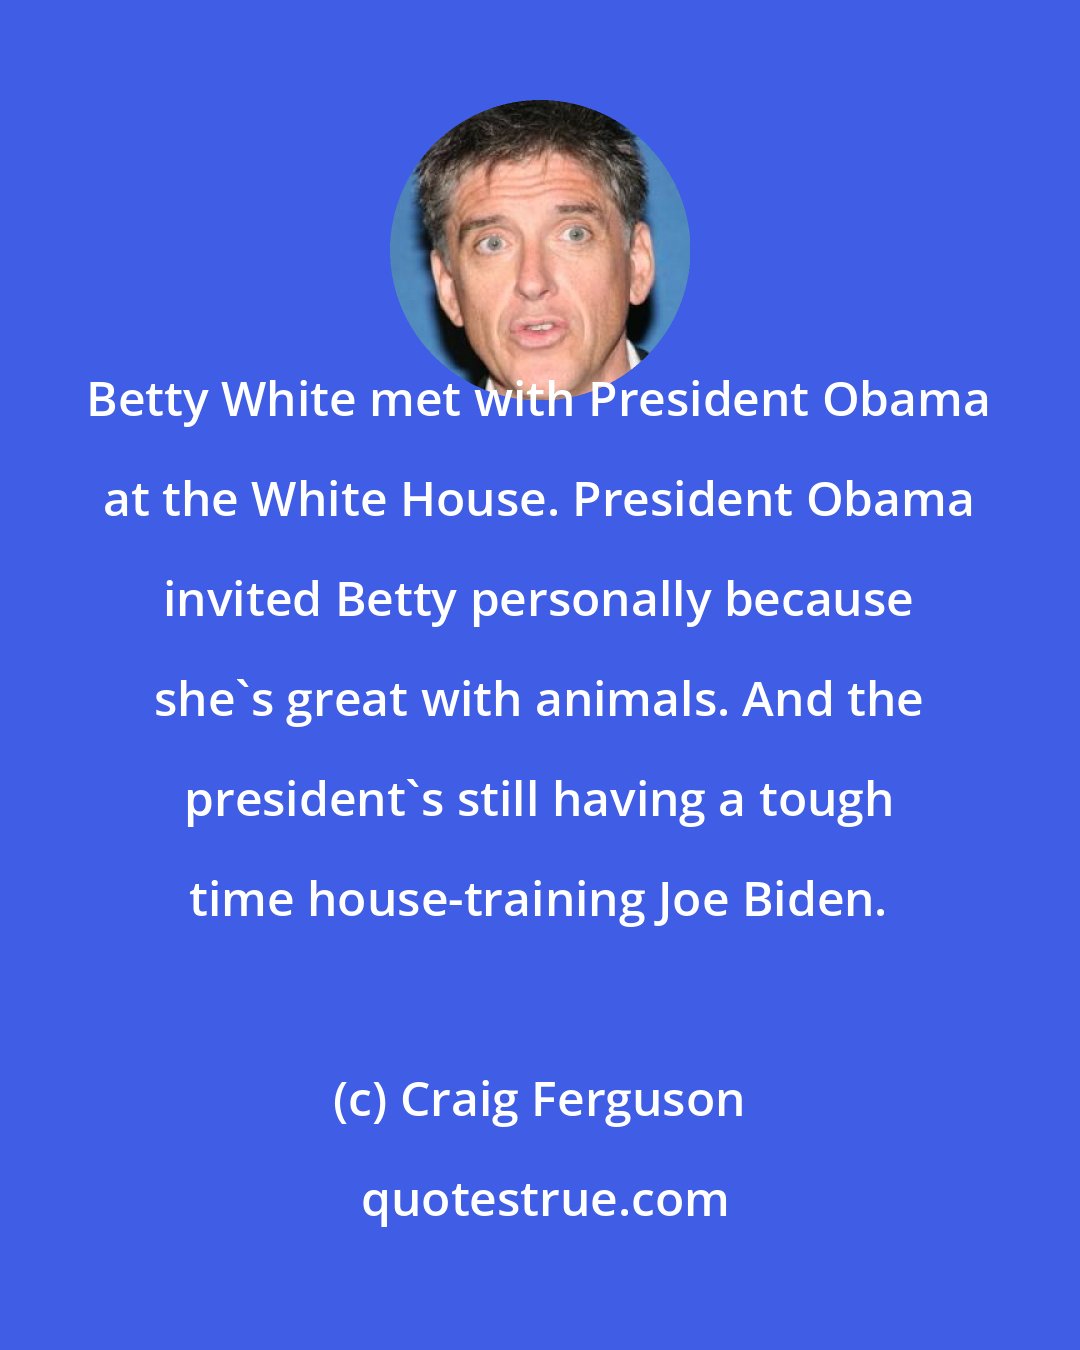 Craig Ferguson: Betty White met with President Obama at the White House. President Obama invited Betty personally because she's great with animals. And the president's still having a tough time house-training Joe Biden.